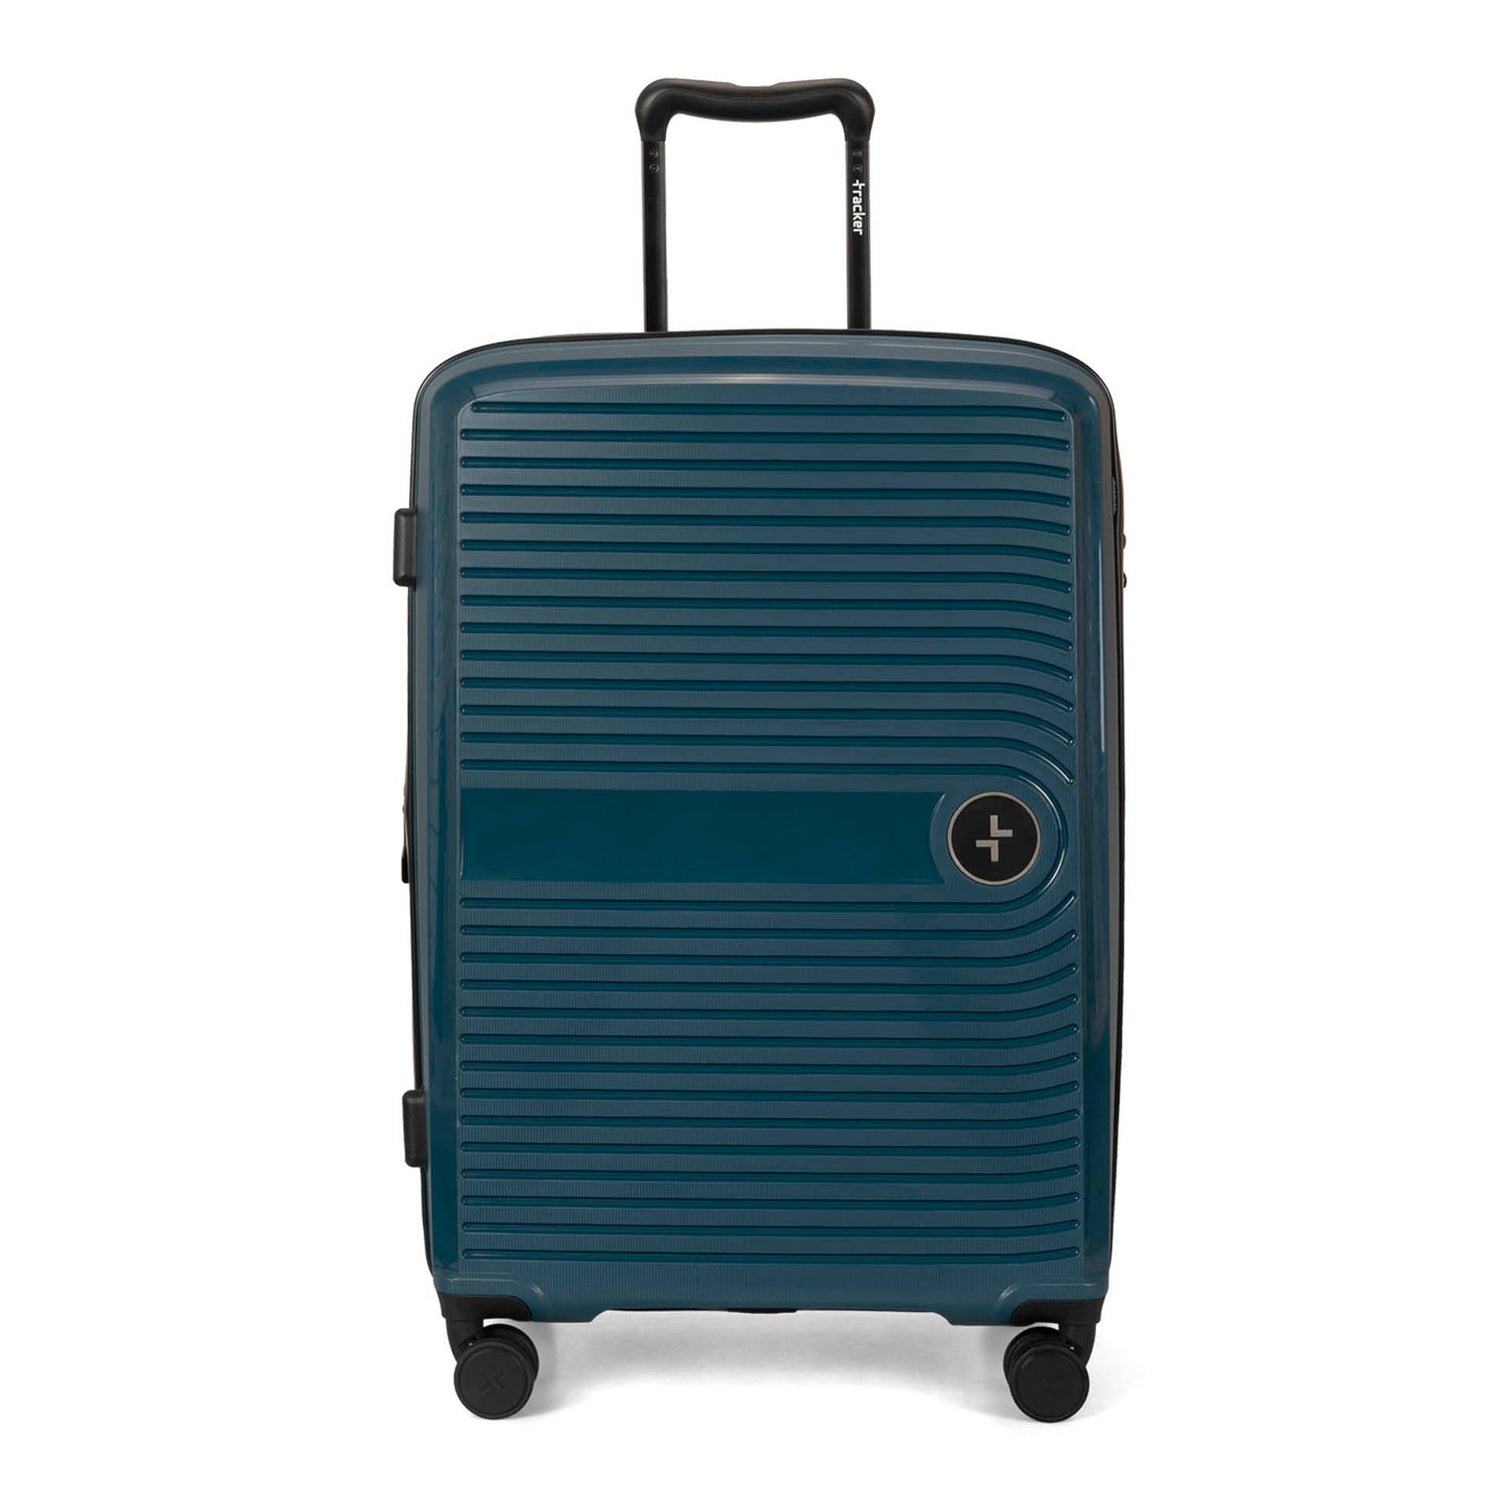 Front side of a navy luggage called Dynamo designed by Tracker showing its telescopic handle, lined-pattern shell, and tracker symbol embossed on the front.